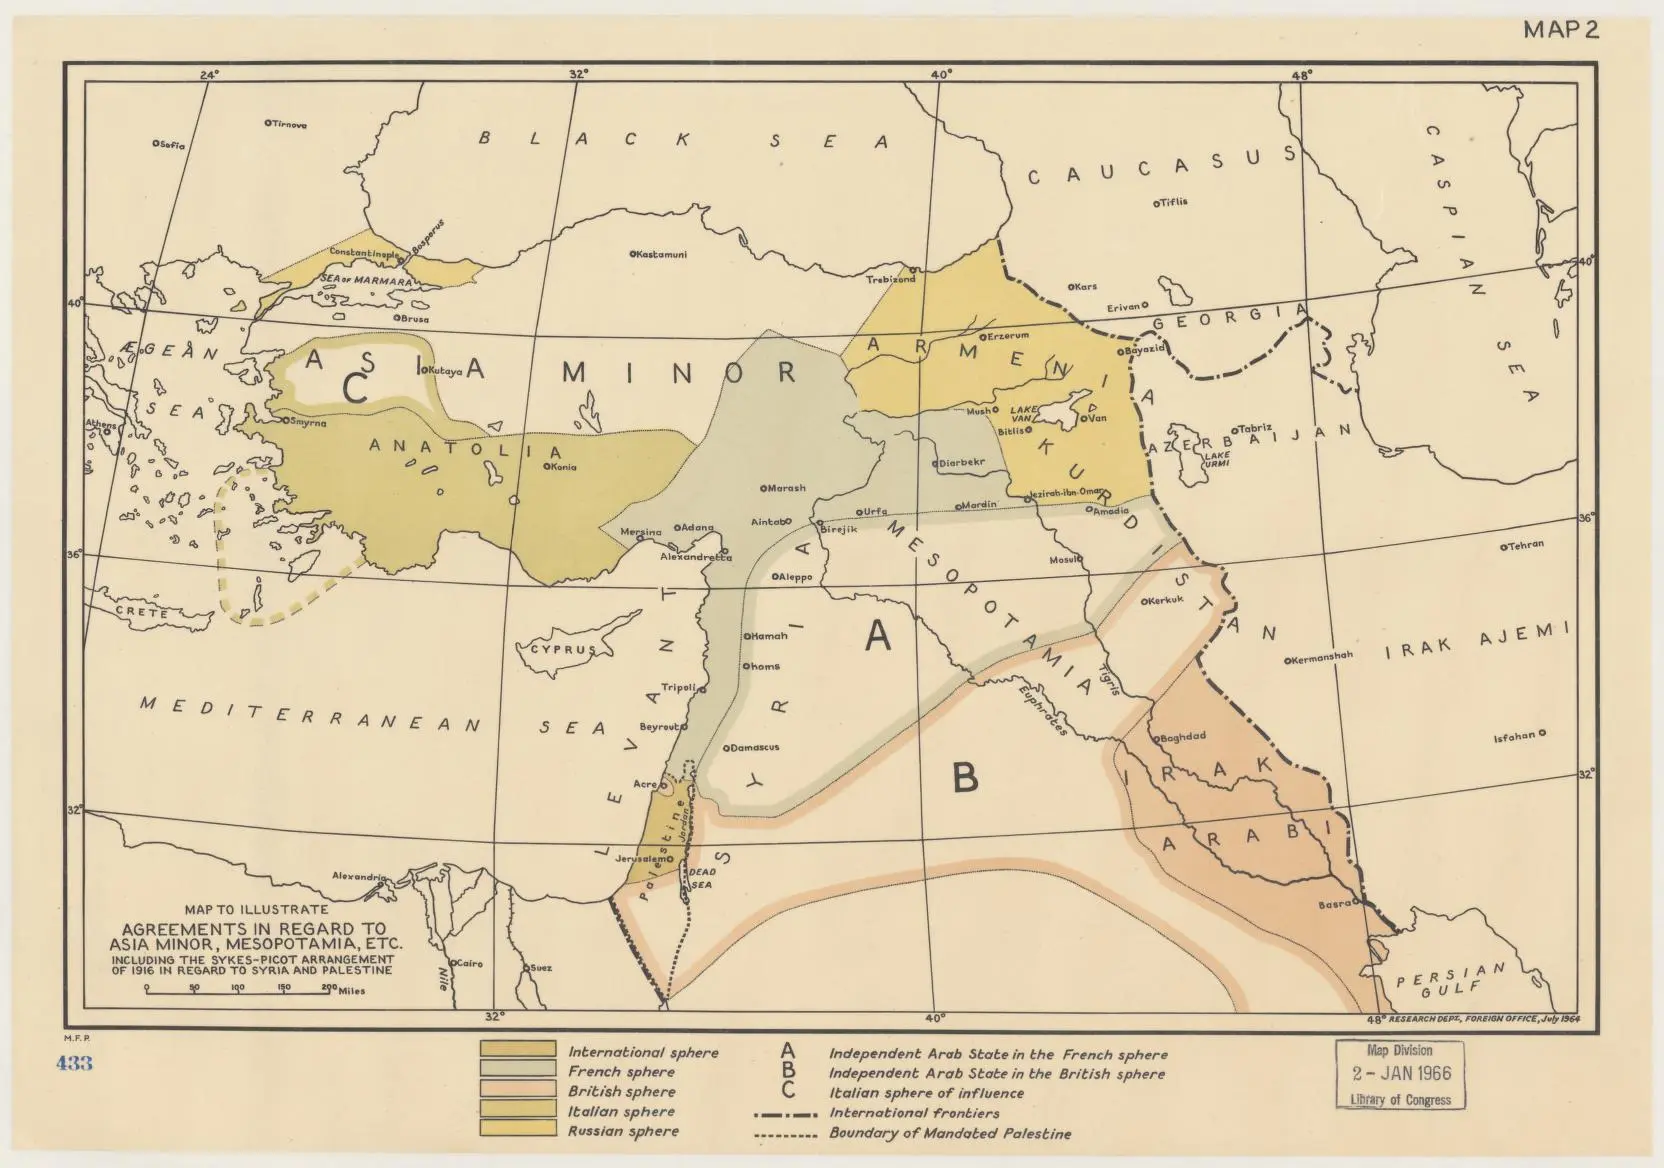 Map to illustrate agreements in regard to Asia Minor, Mesopotamia including the Sykes-Picot arrangement of 1916 in regard to Syria and Palestine